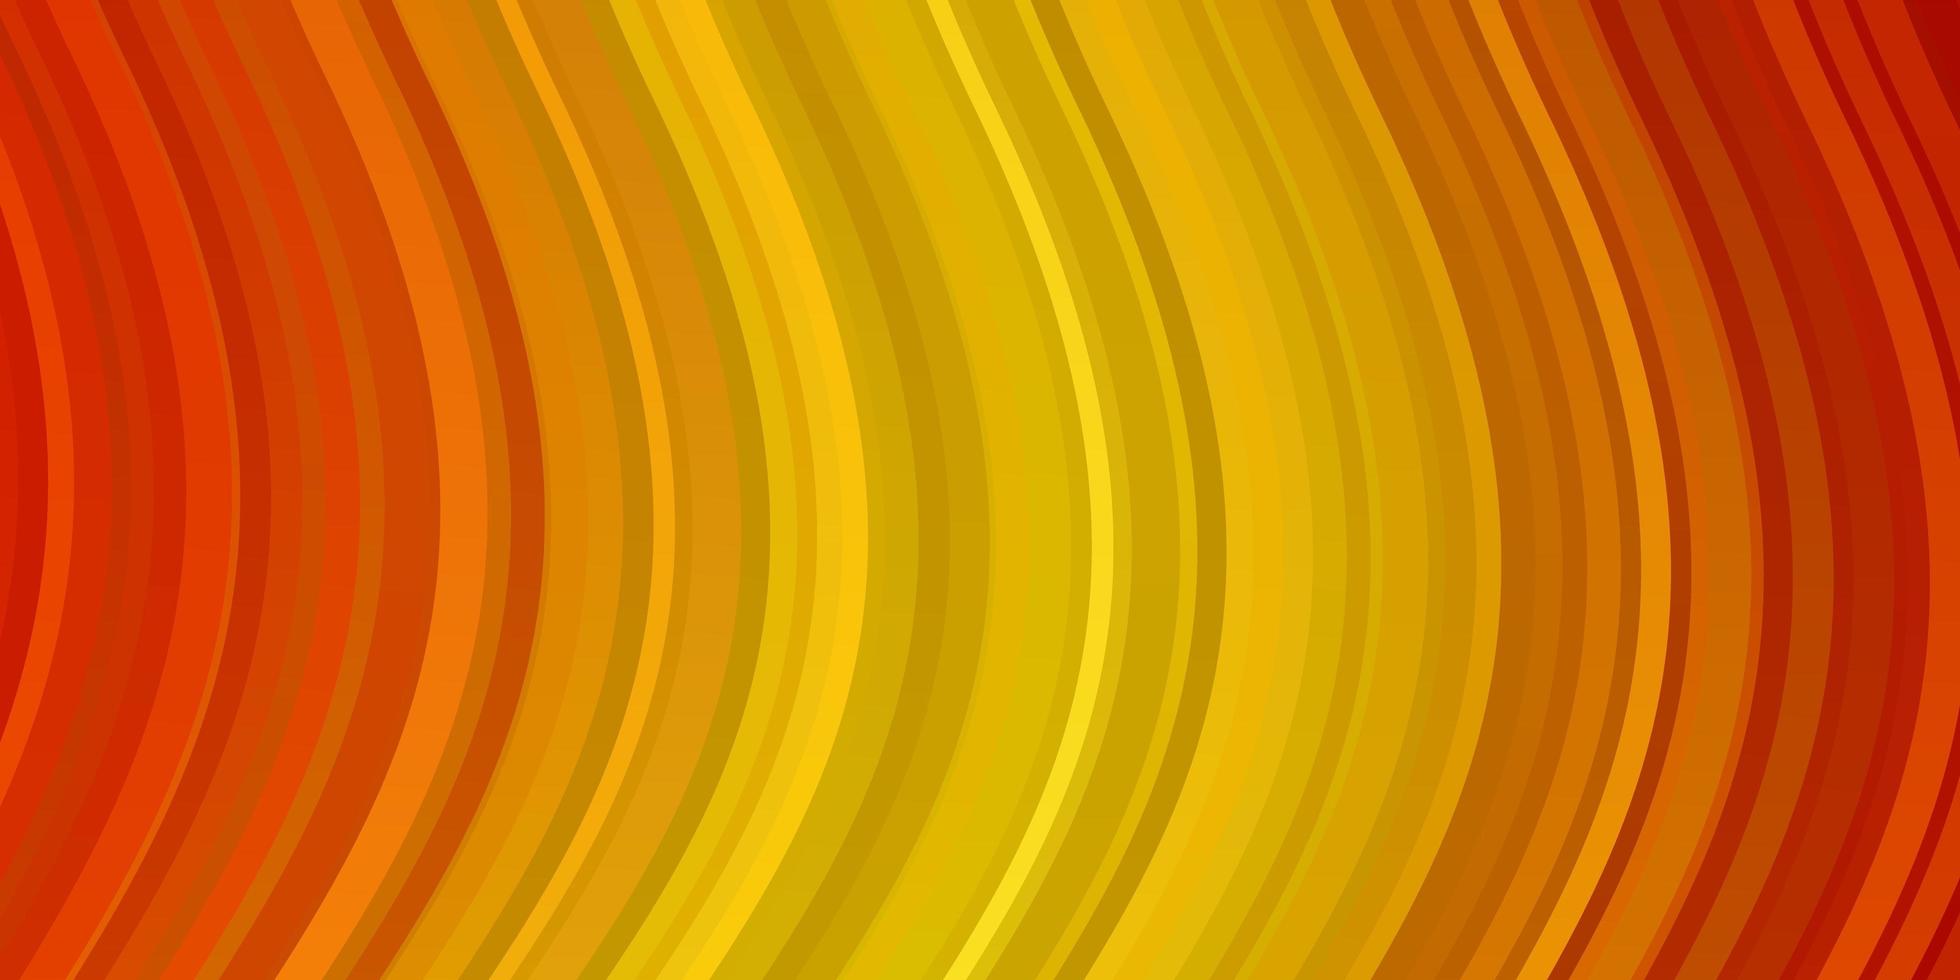 Light Orange vector background with curved lines